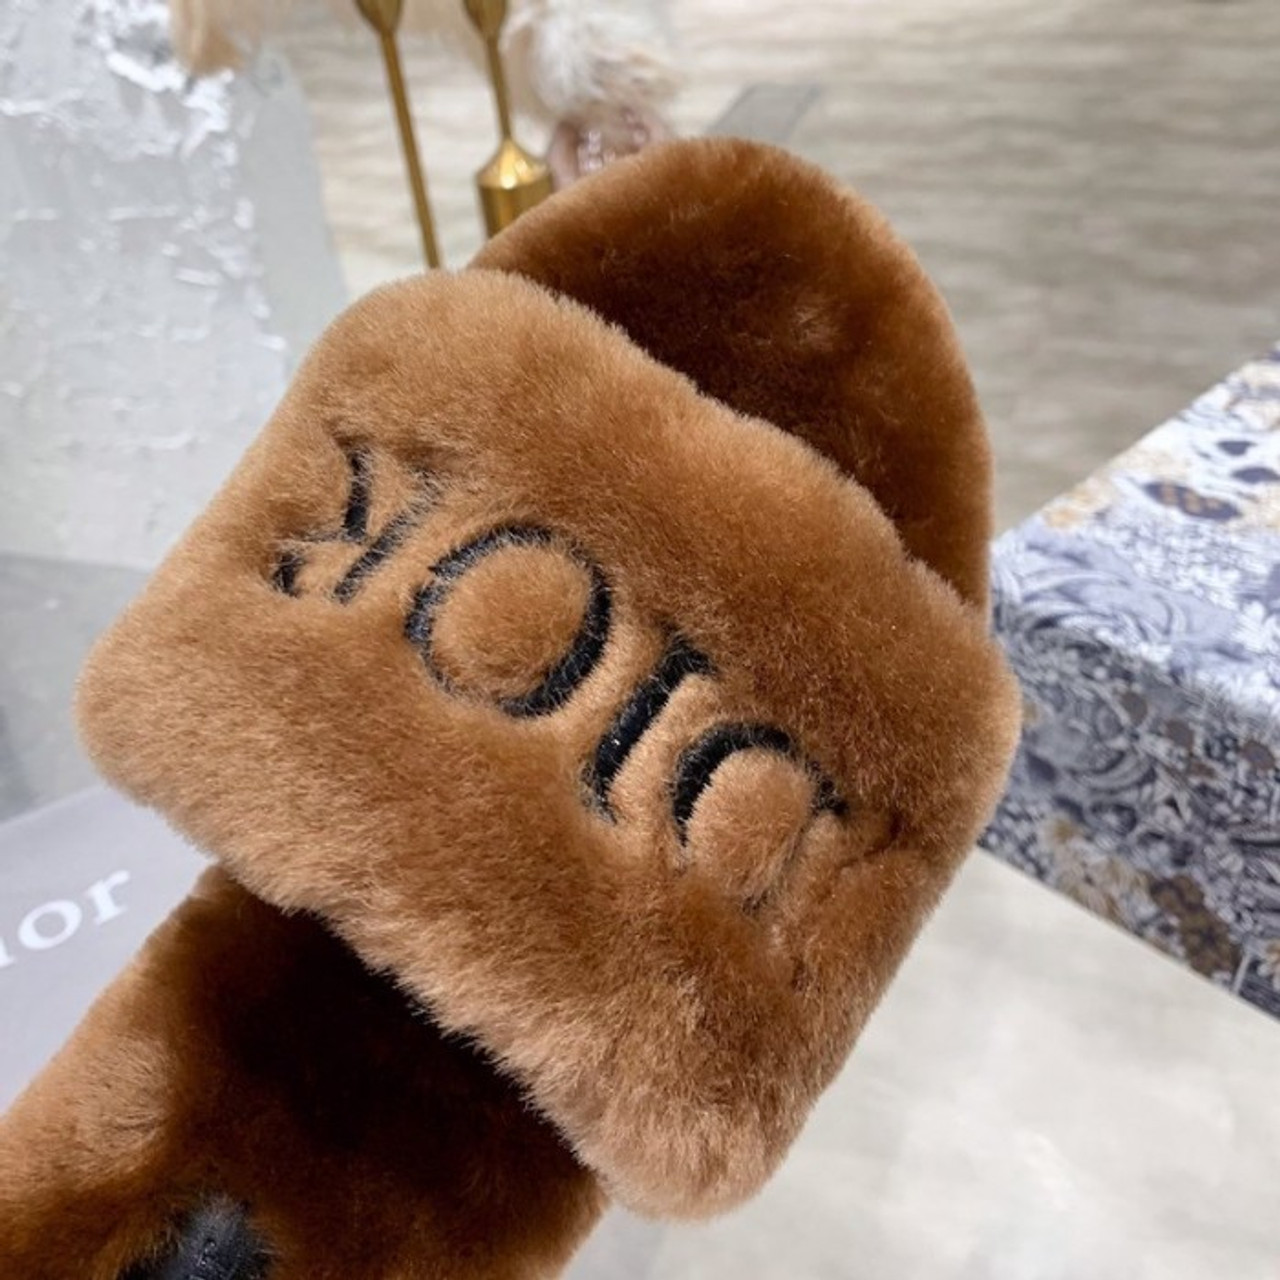 where to buy the best stockX High quality replica UA Dior Fur Women Slides  Hypedripz is the best high quality trusted clone replica fake designer  hypebeast seller website 2021